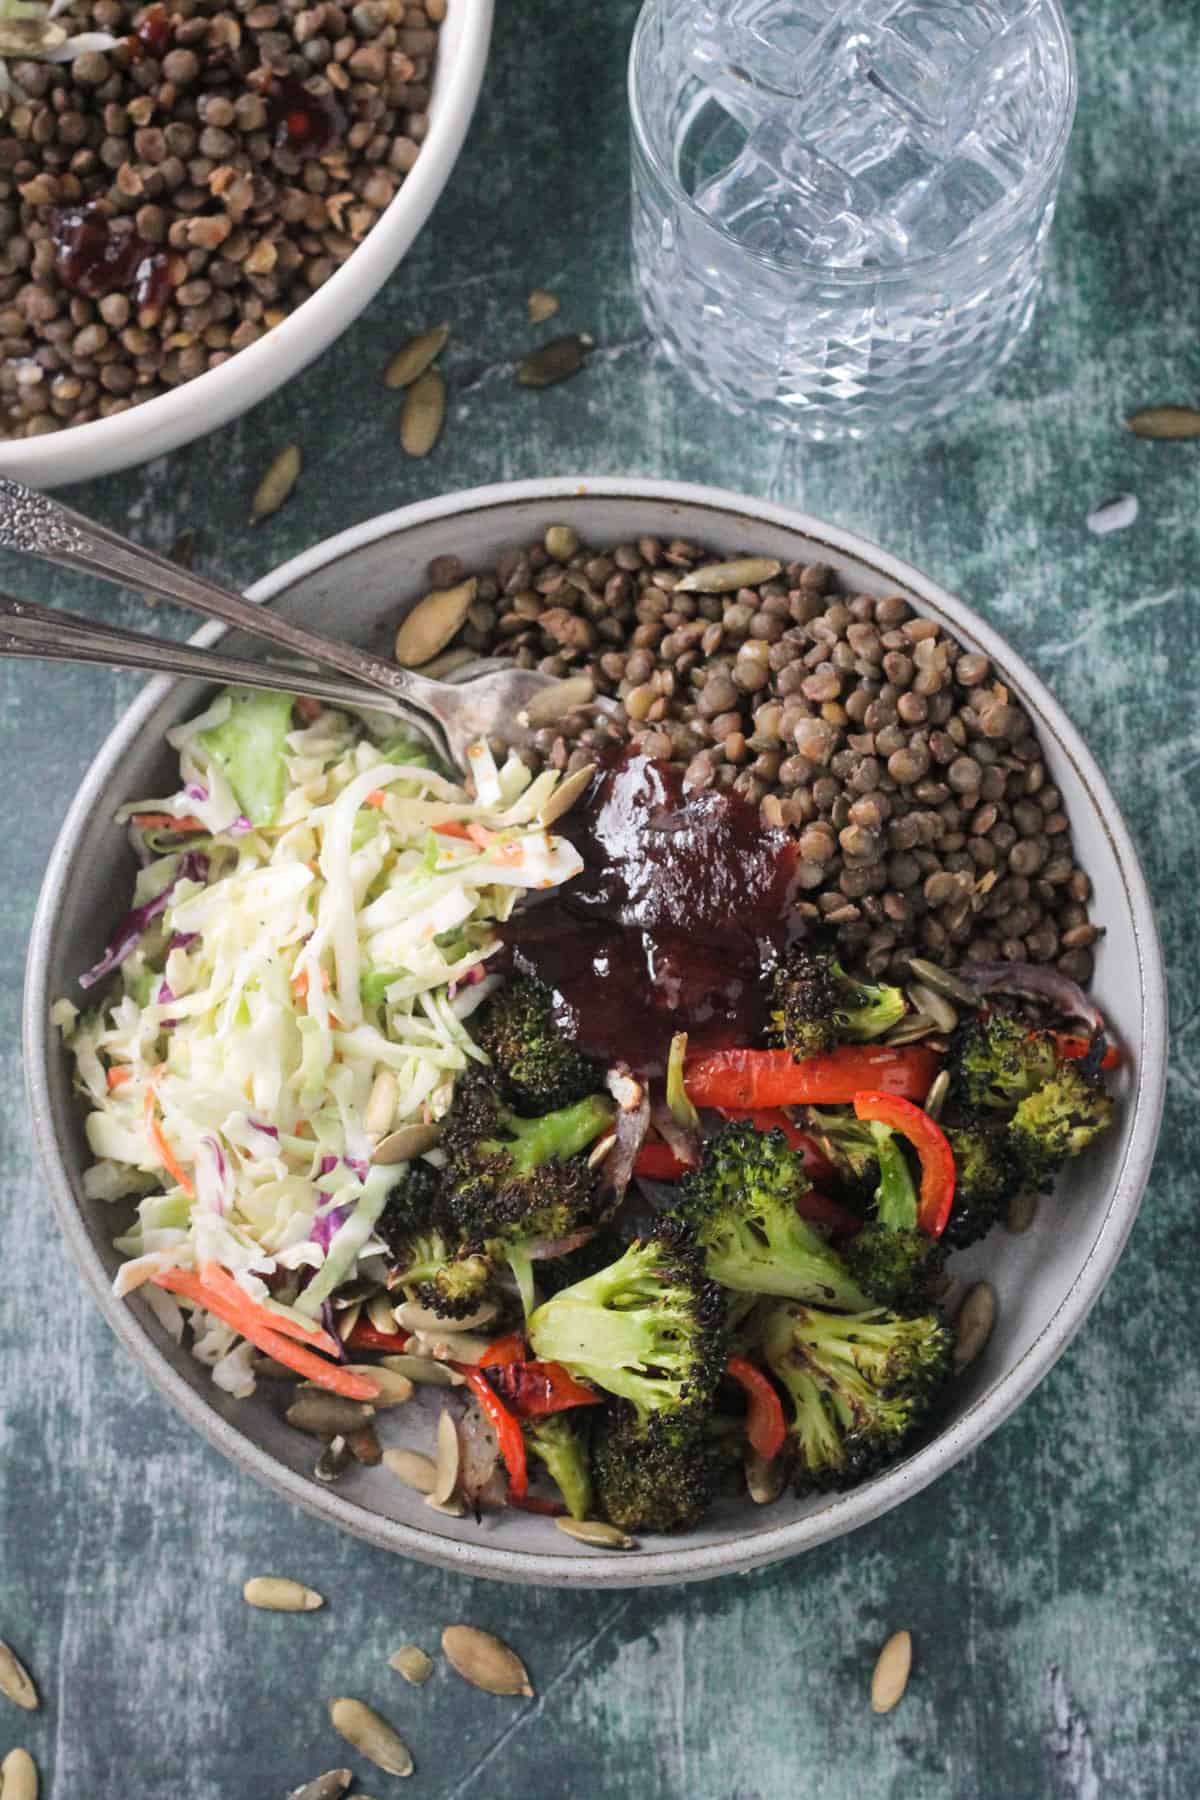 Two forks in a pile of lentils next to roasted broccoli, coleslaw, and bbq sauce.